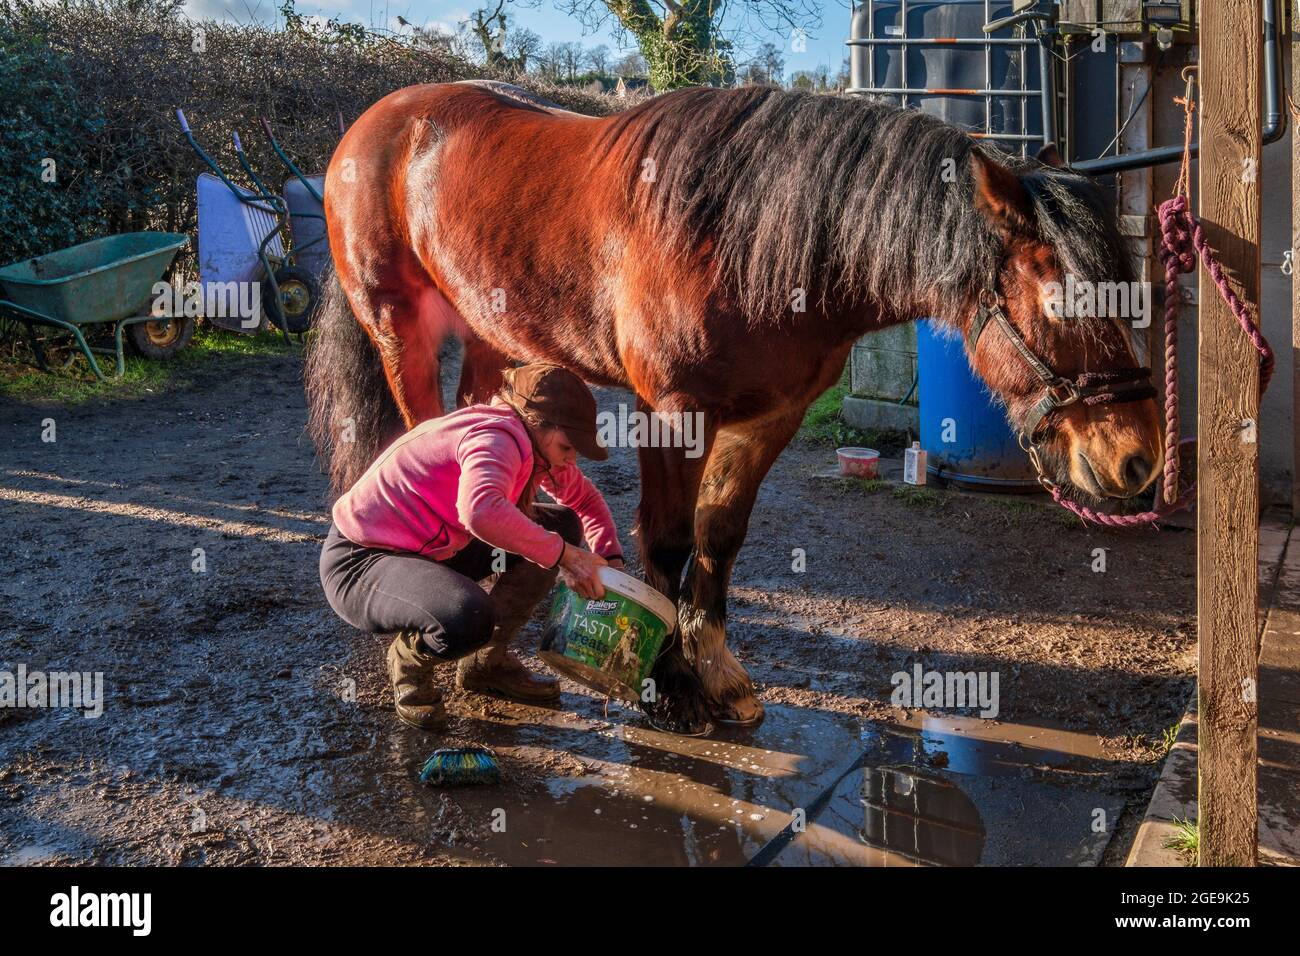 A bay horse being groomed at a stable yard. Stock Photo